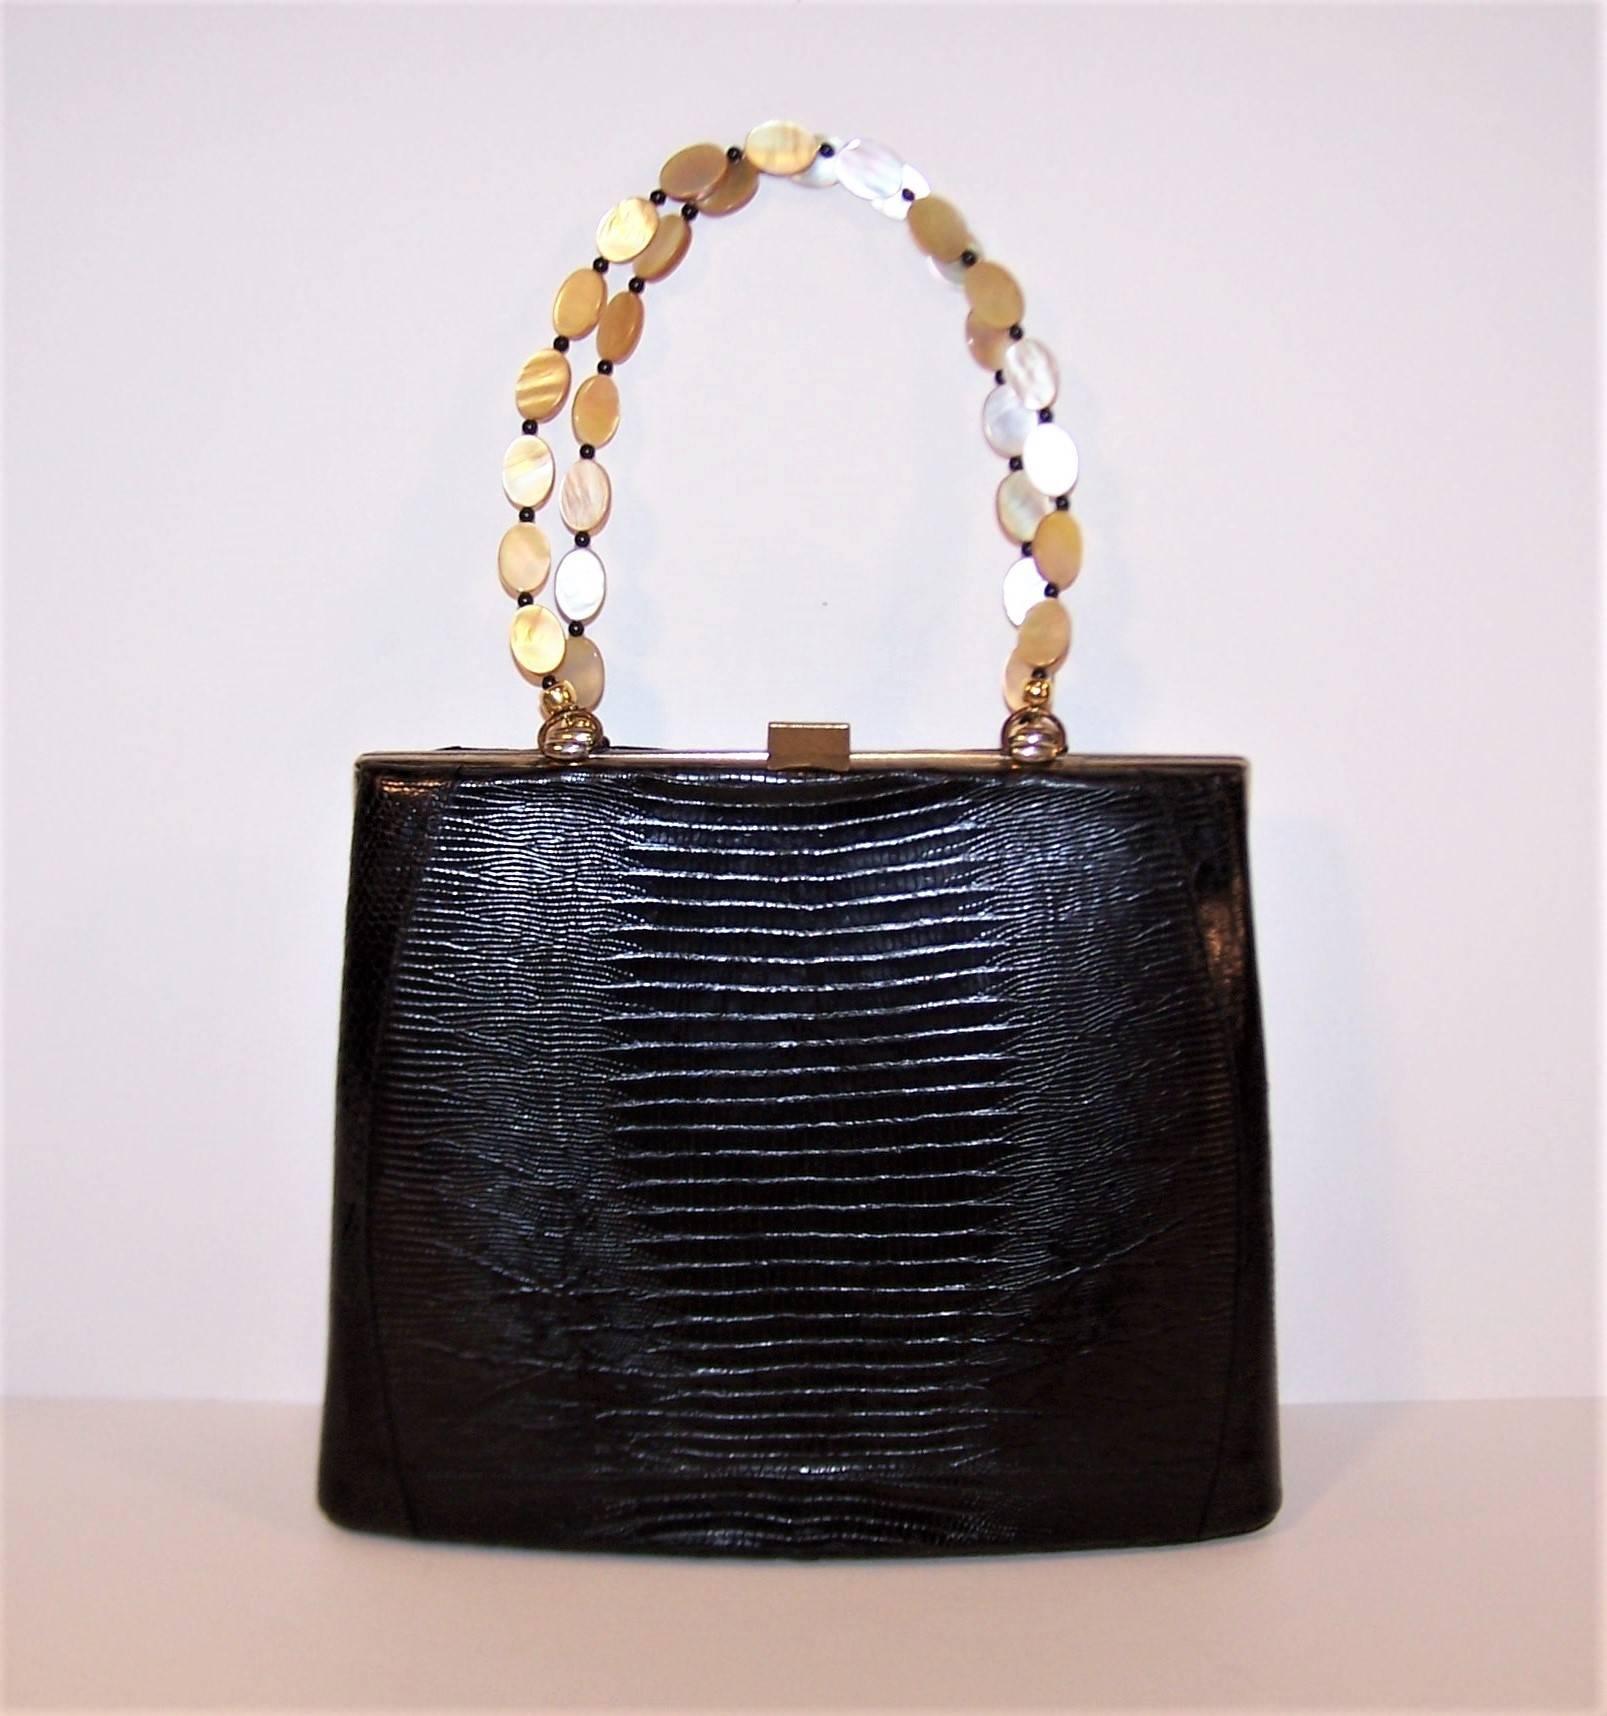 Poetic license has been taken with this handsome black snakeskin handbag by Sydney of California in the form of a replaced handle and the results are as smooth as a sonnet.  The double handles are formed from polished mother-of-pearl ovals